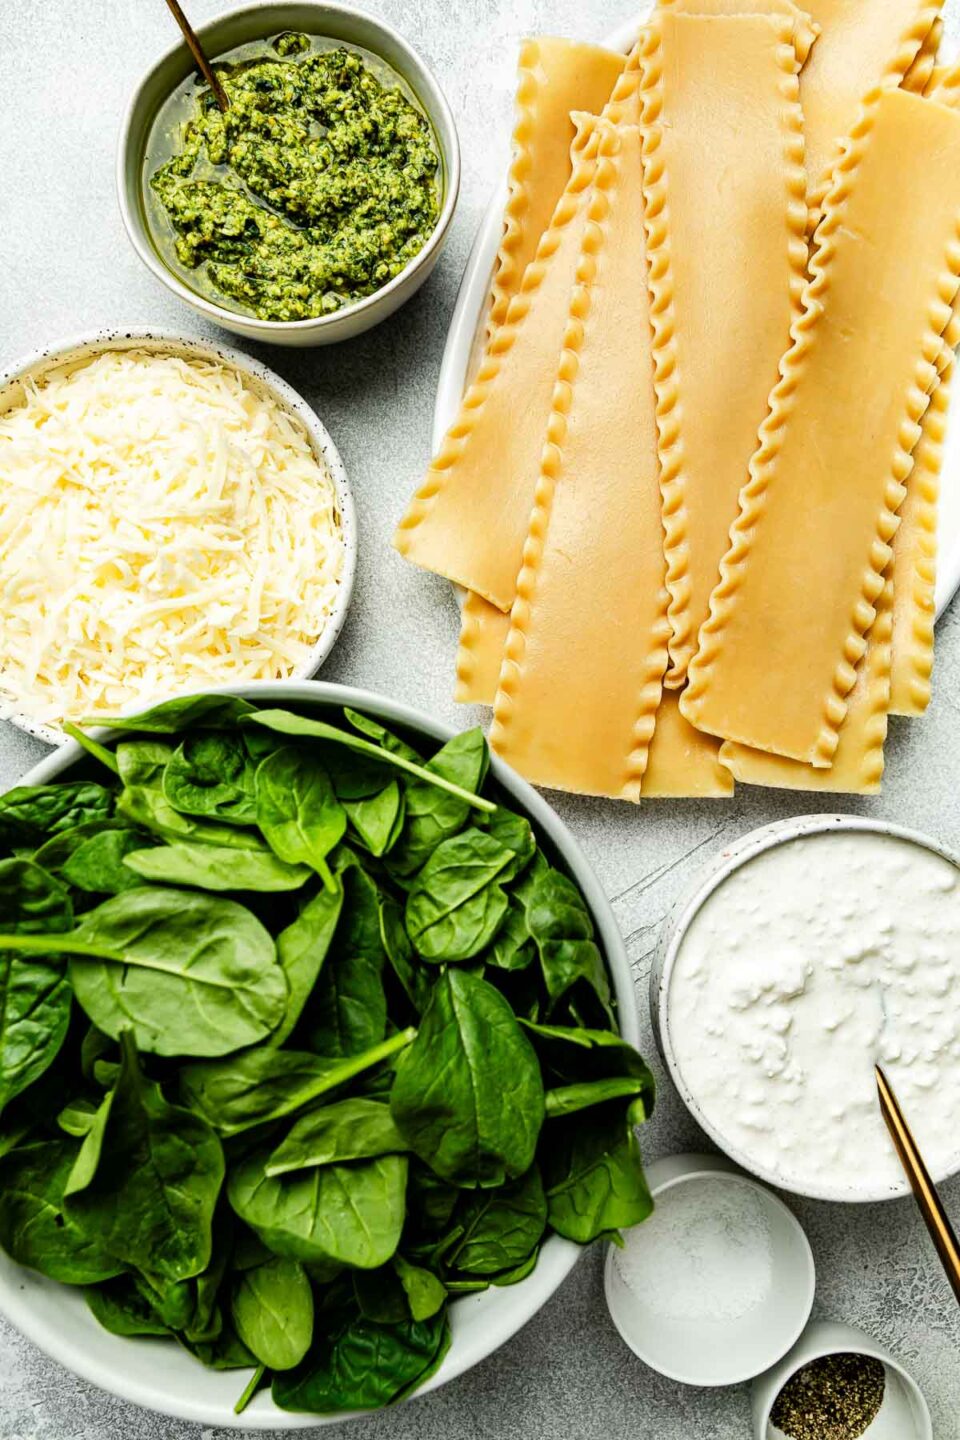 Ingredients are displayed on a light grey surface: lasagna noodles, basil pesto, spinach, cottage cheese, mozzarella, and salt and pepper.